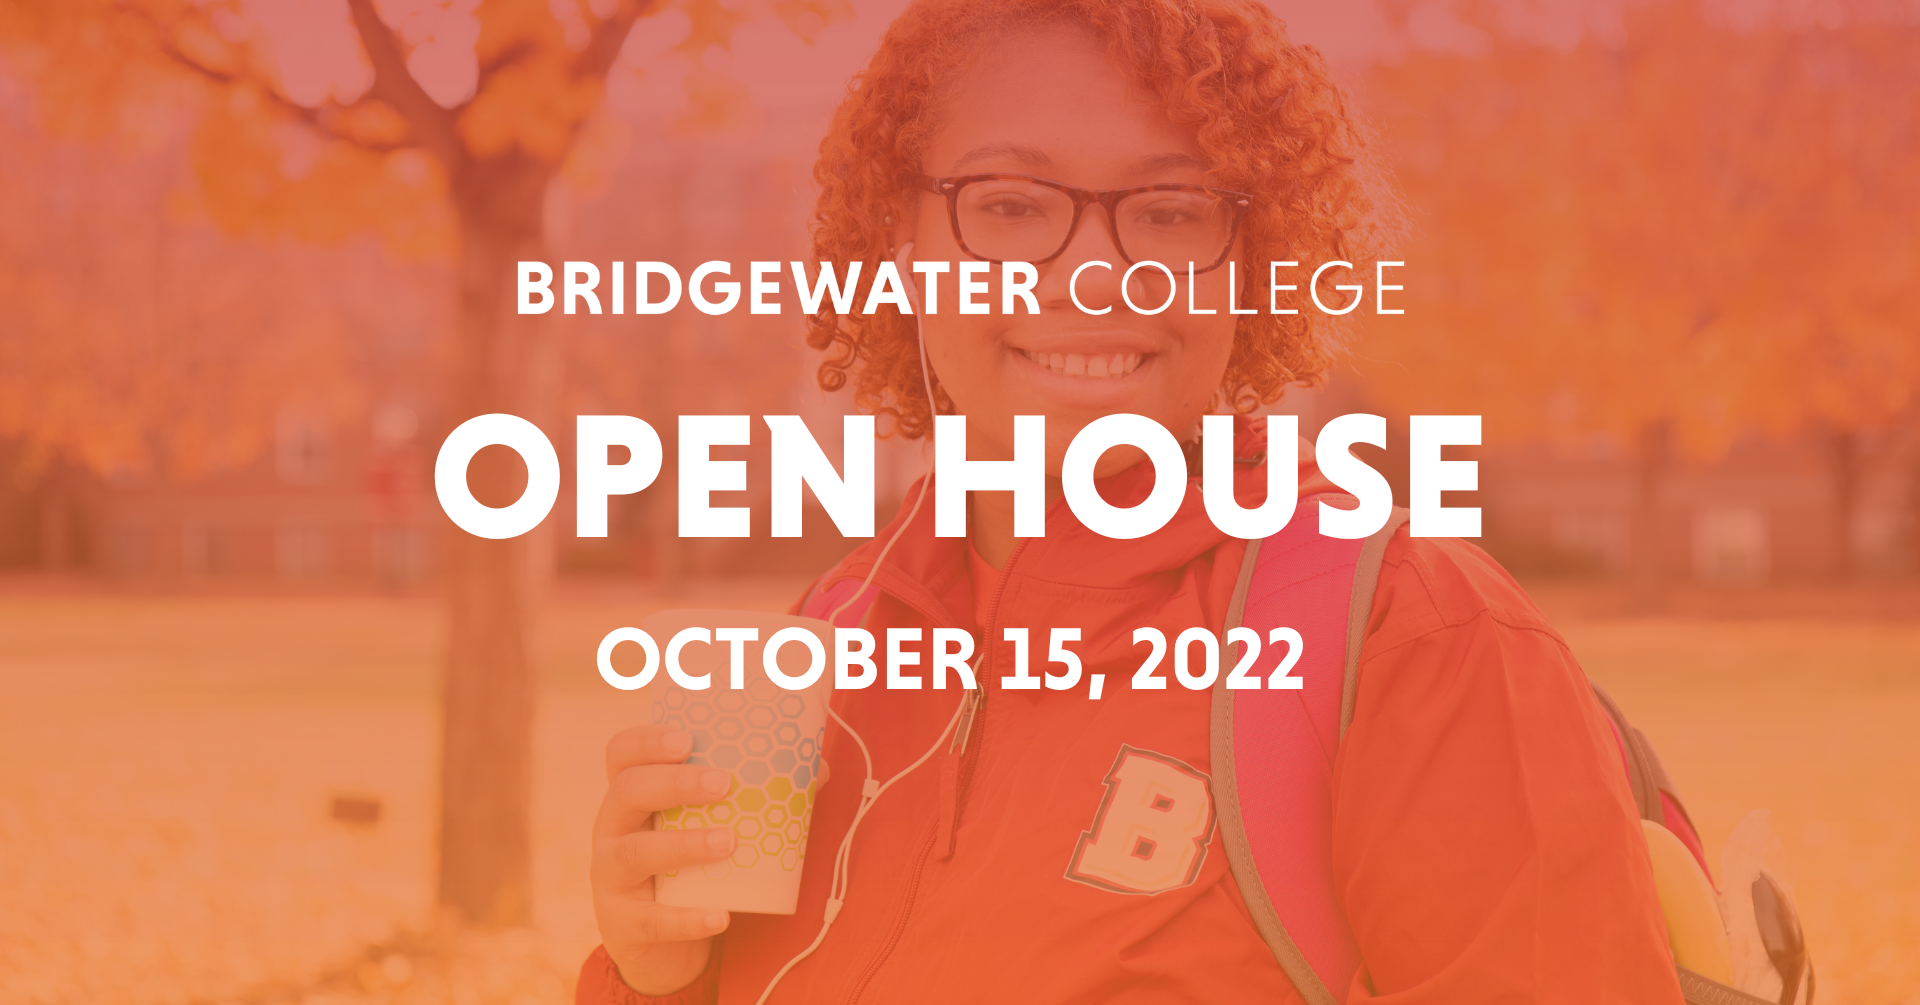 Bridgewater College Open House October 15, 2022 Person smiling in the background